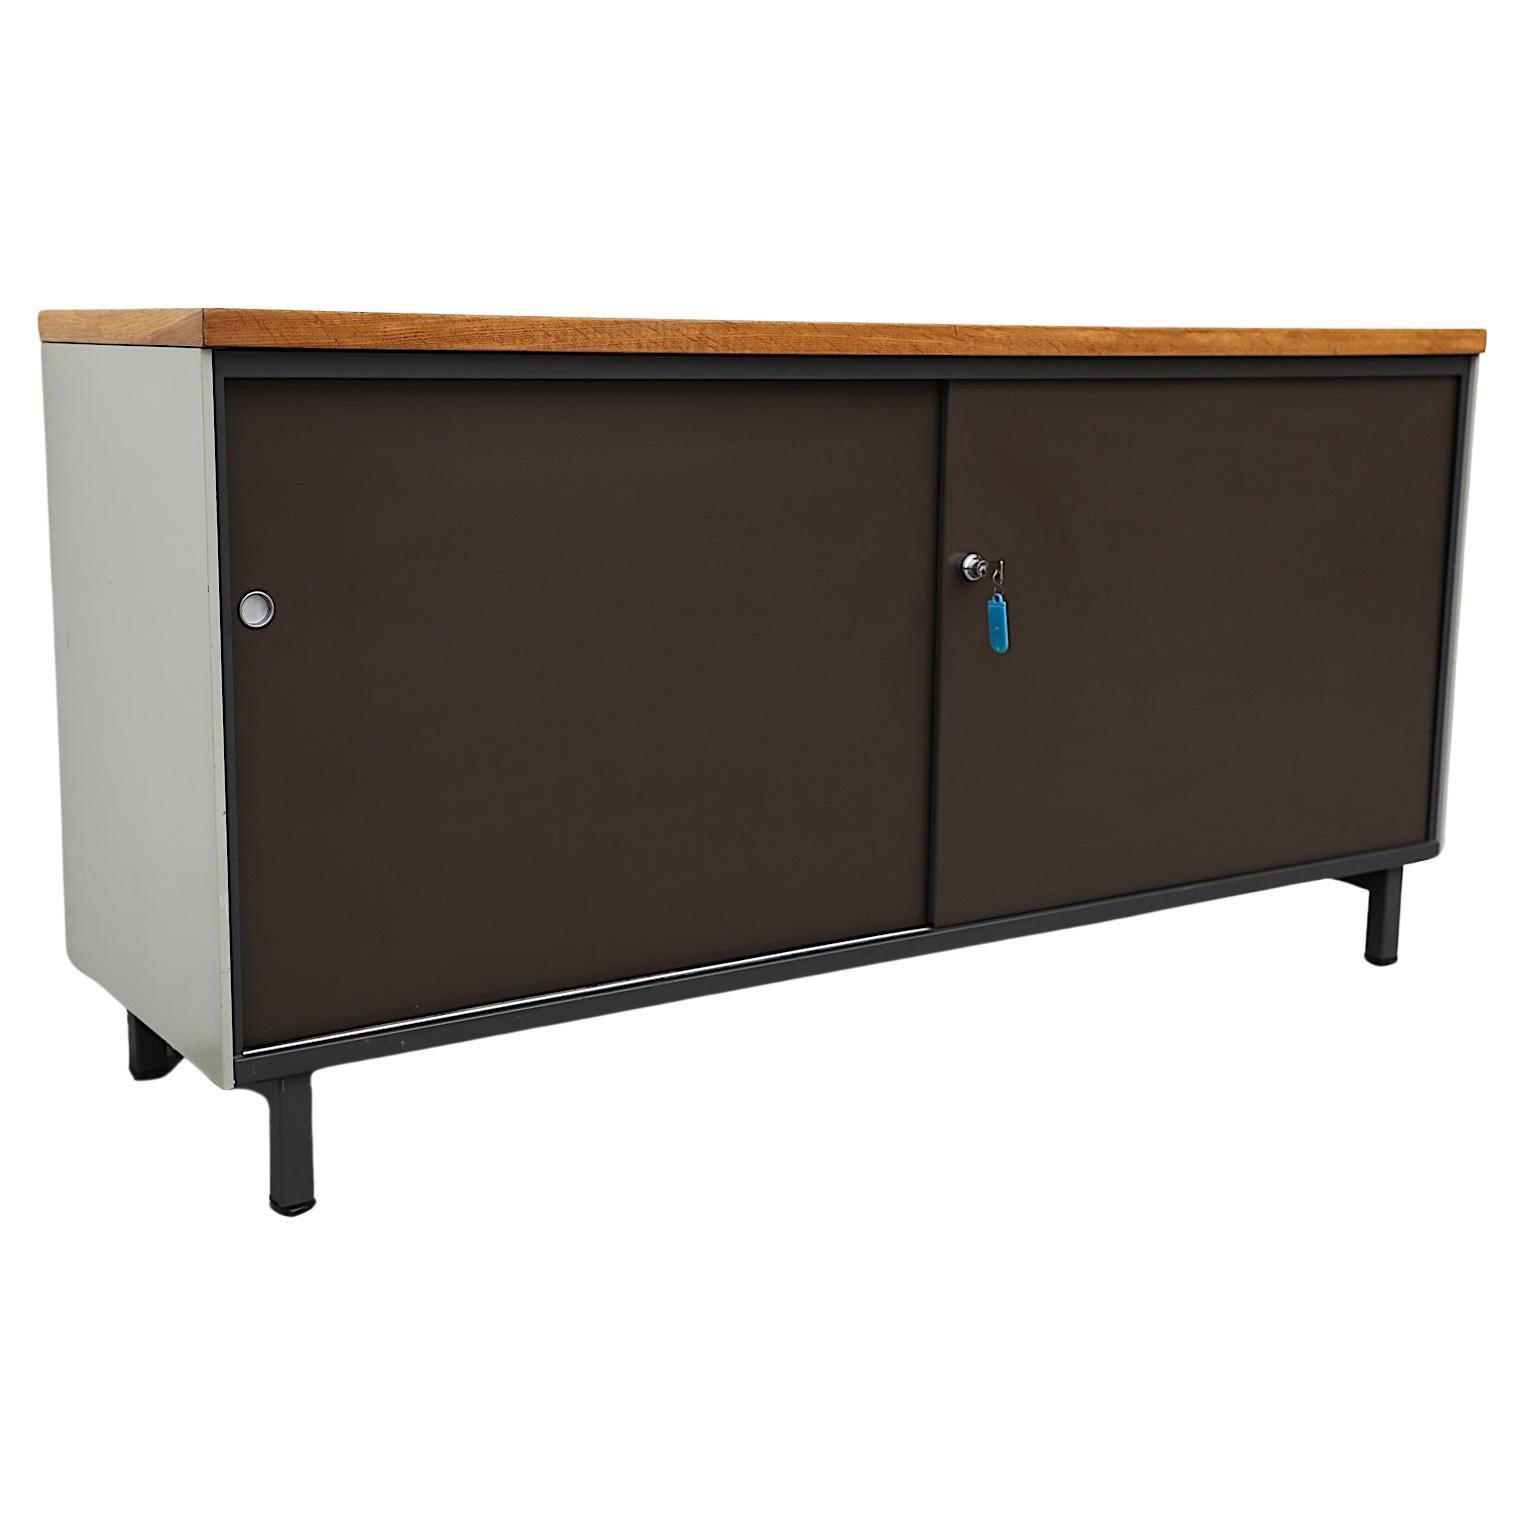 Mid-Century Gispen Industrial Credenza with Wood Top